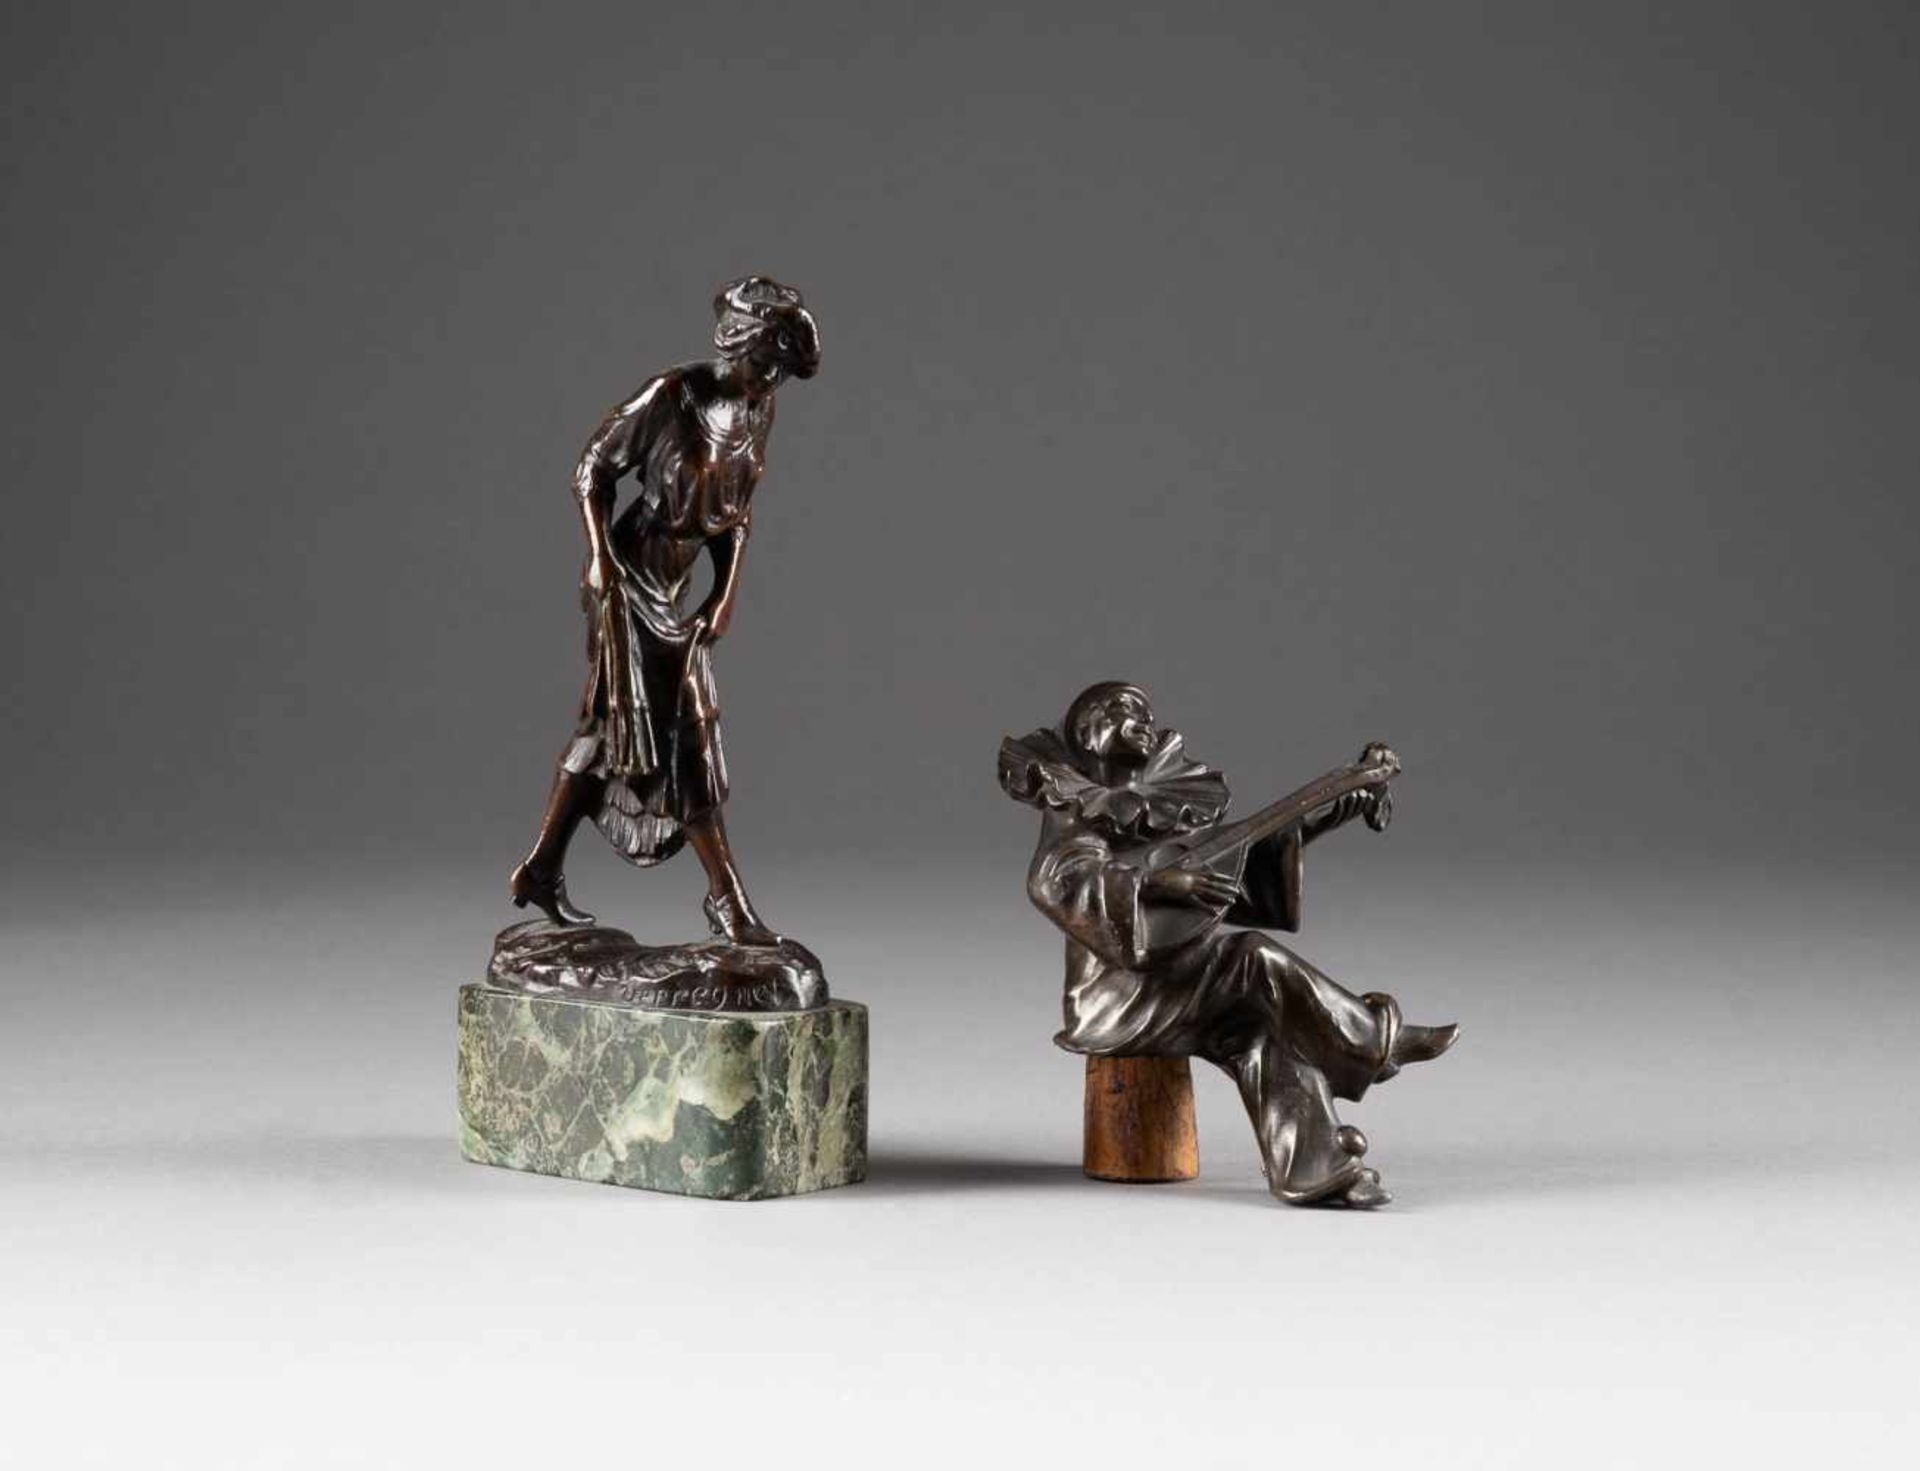 MODERN SCULPTORSActive in the 1st half of the 20th century TWO BRONZES ('VERREGNET' AND 'CLOWN